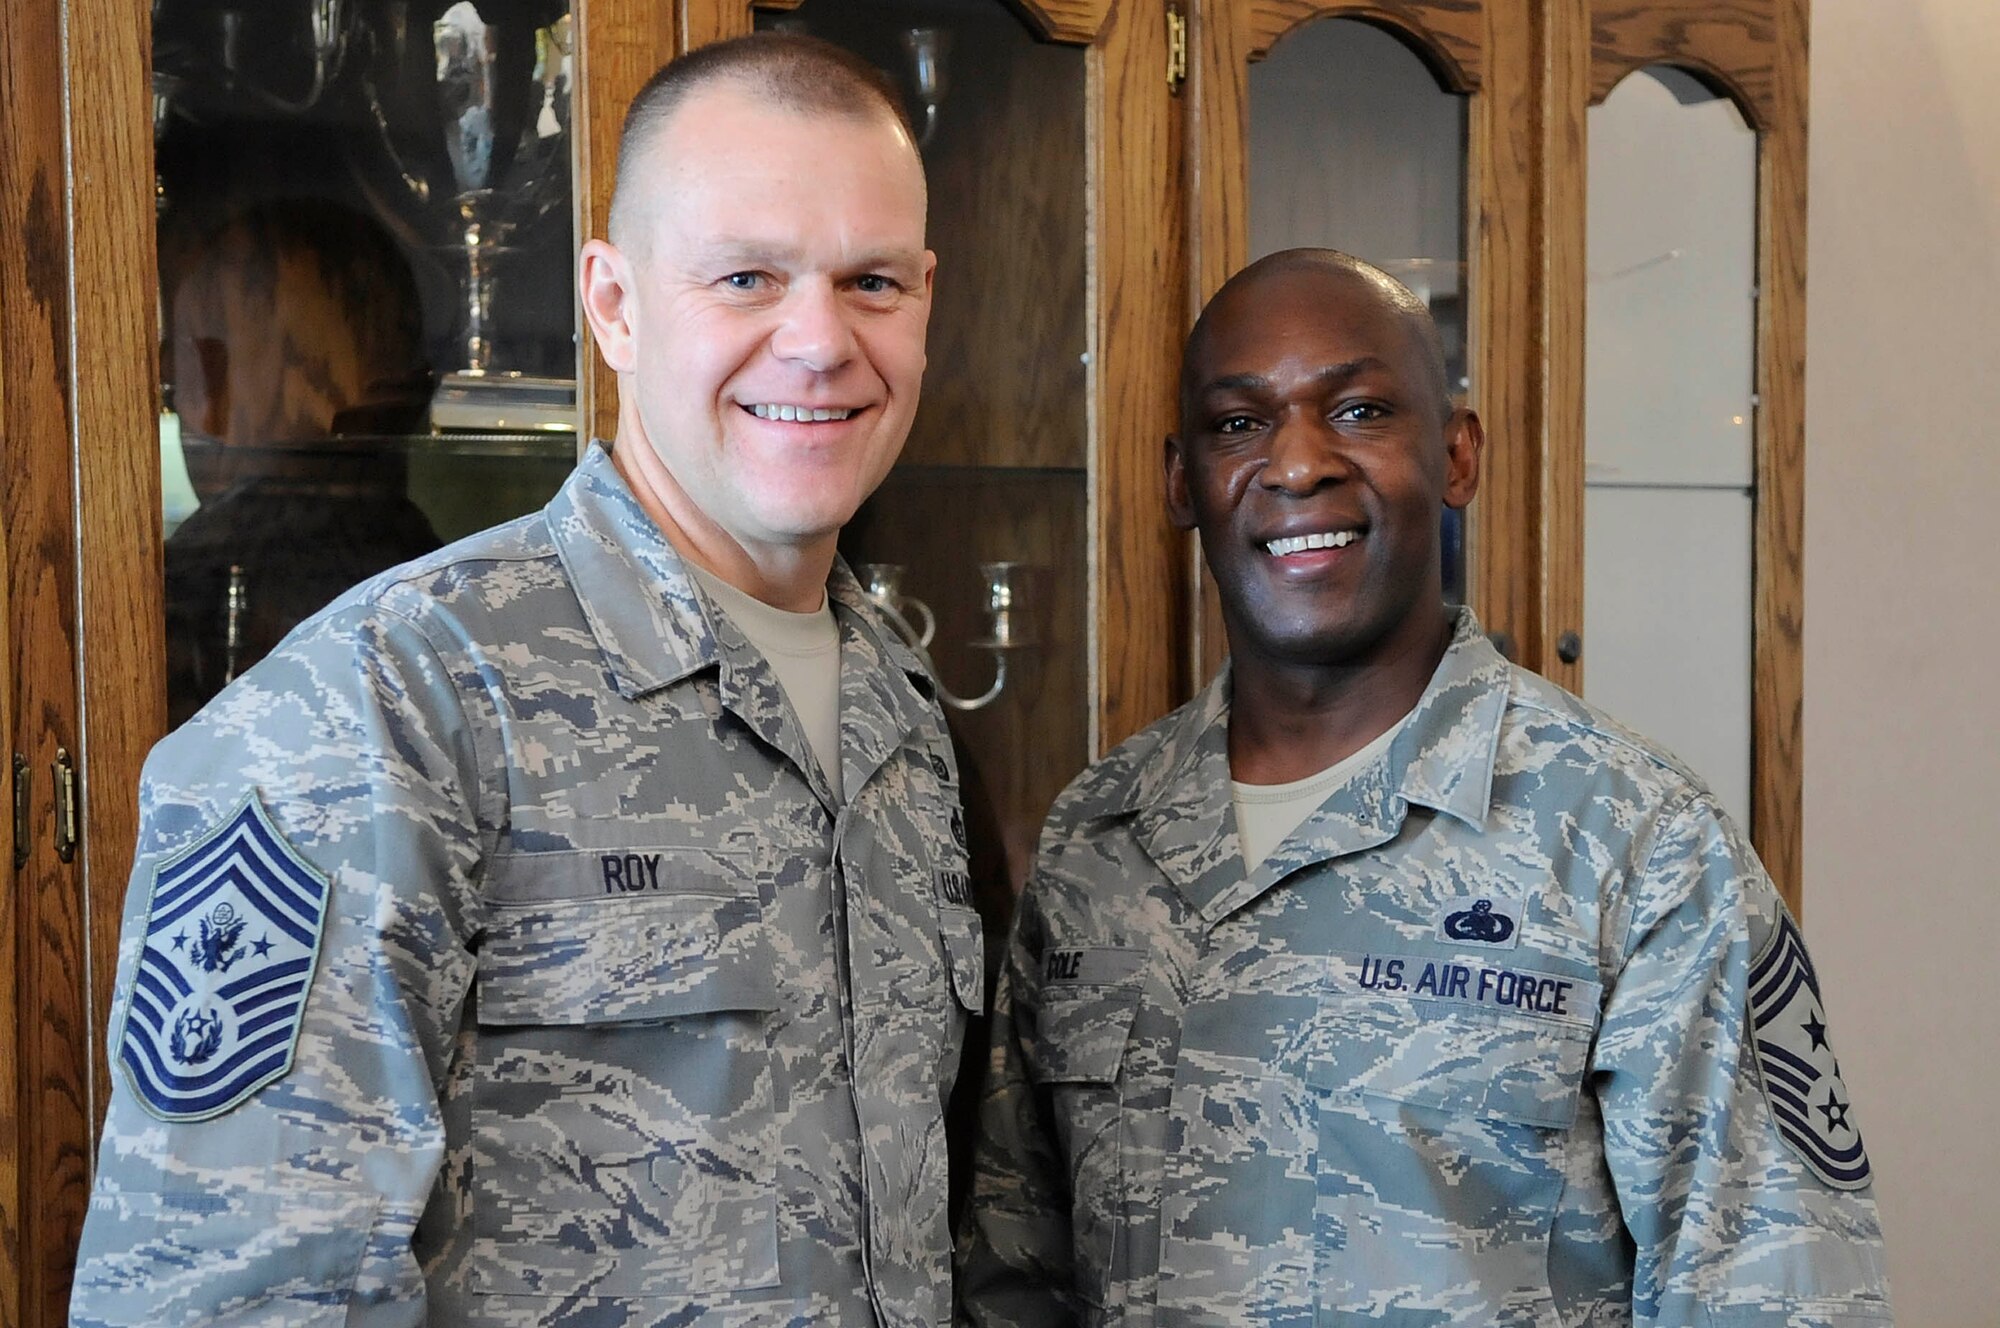 ELLSWORTH AIR FORCE BASE, S.D.--Chief Master Sgt. of the Air Force James A. Roy and Chief Master Sgt. Clifton Cole, 28th Bomb Wing command chief, pose for a photo together, Oct. 22. Chief Roy and Chief Cole served at Yokota Air Base together. (U.S. Air Force photo/Airman 1st Class Corey Hook)